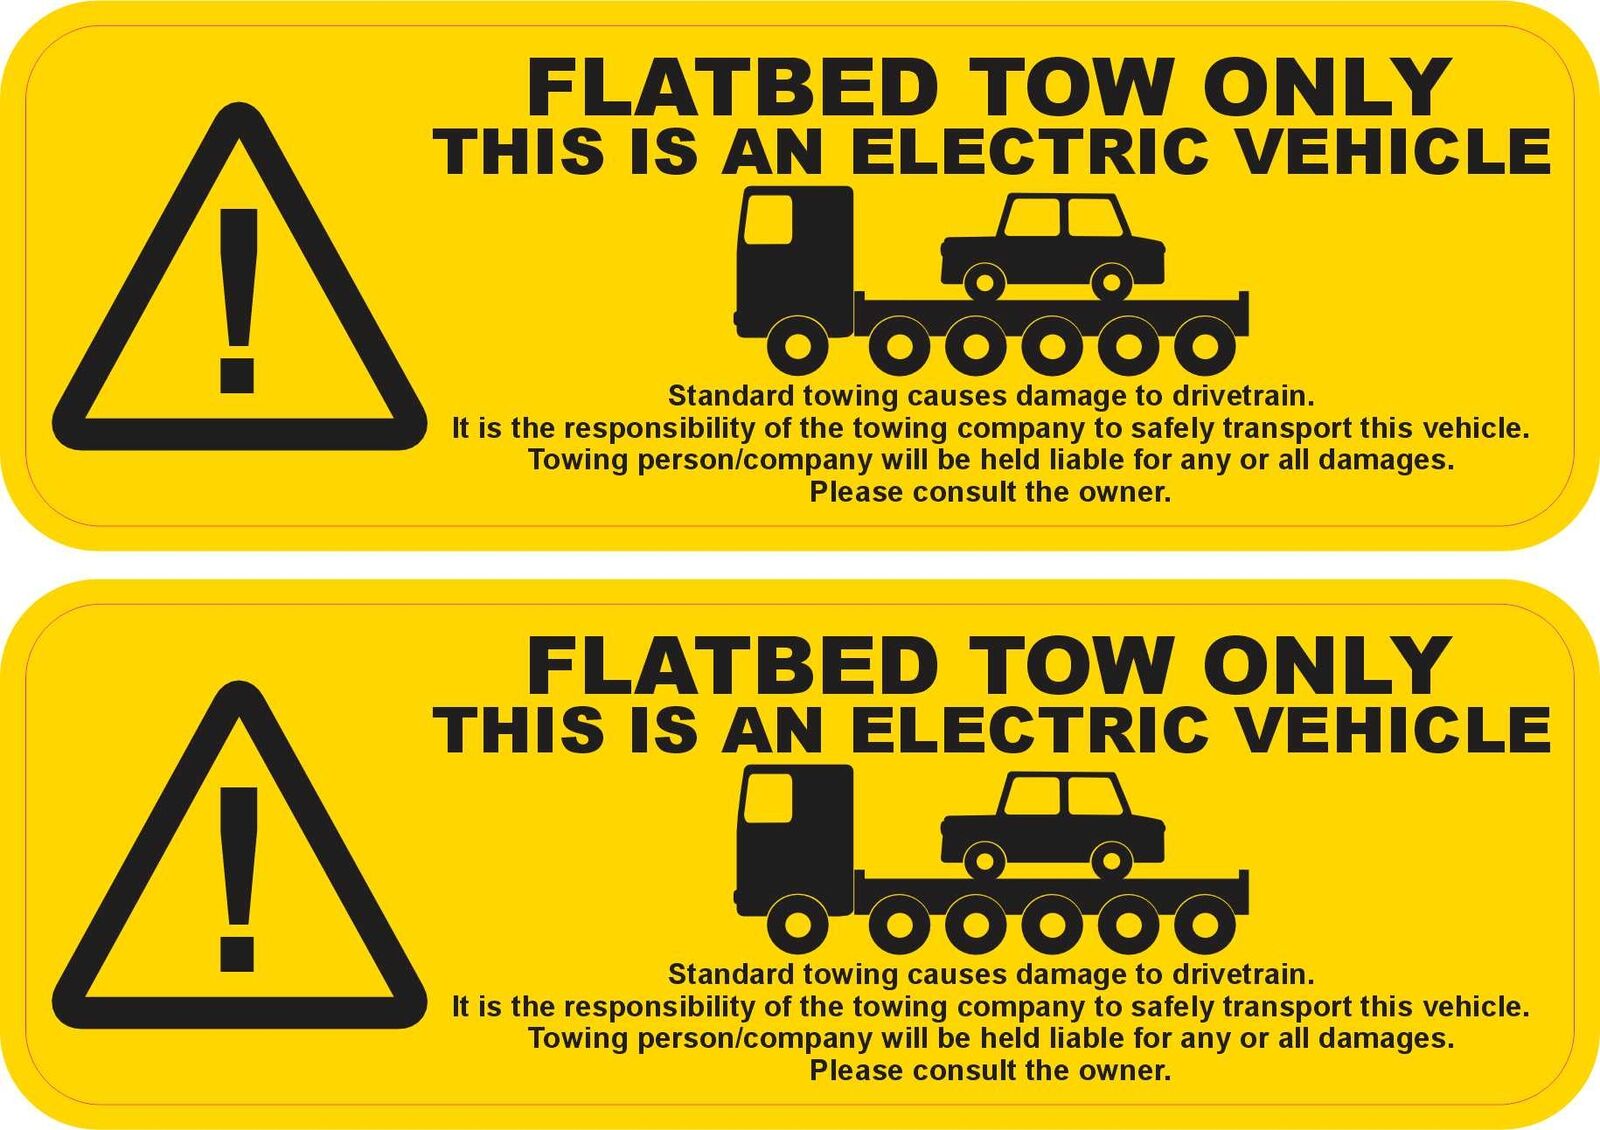 StickerTalk Electric Vehicle Flatbed Tow Stickers, 6 inches x 2 inches